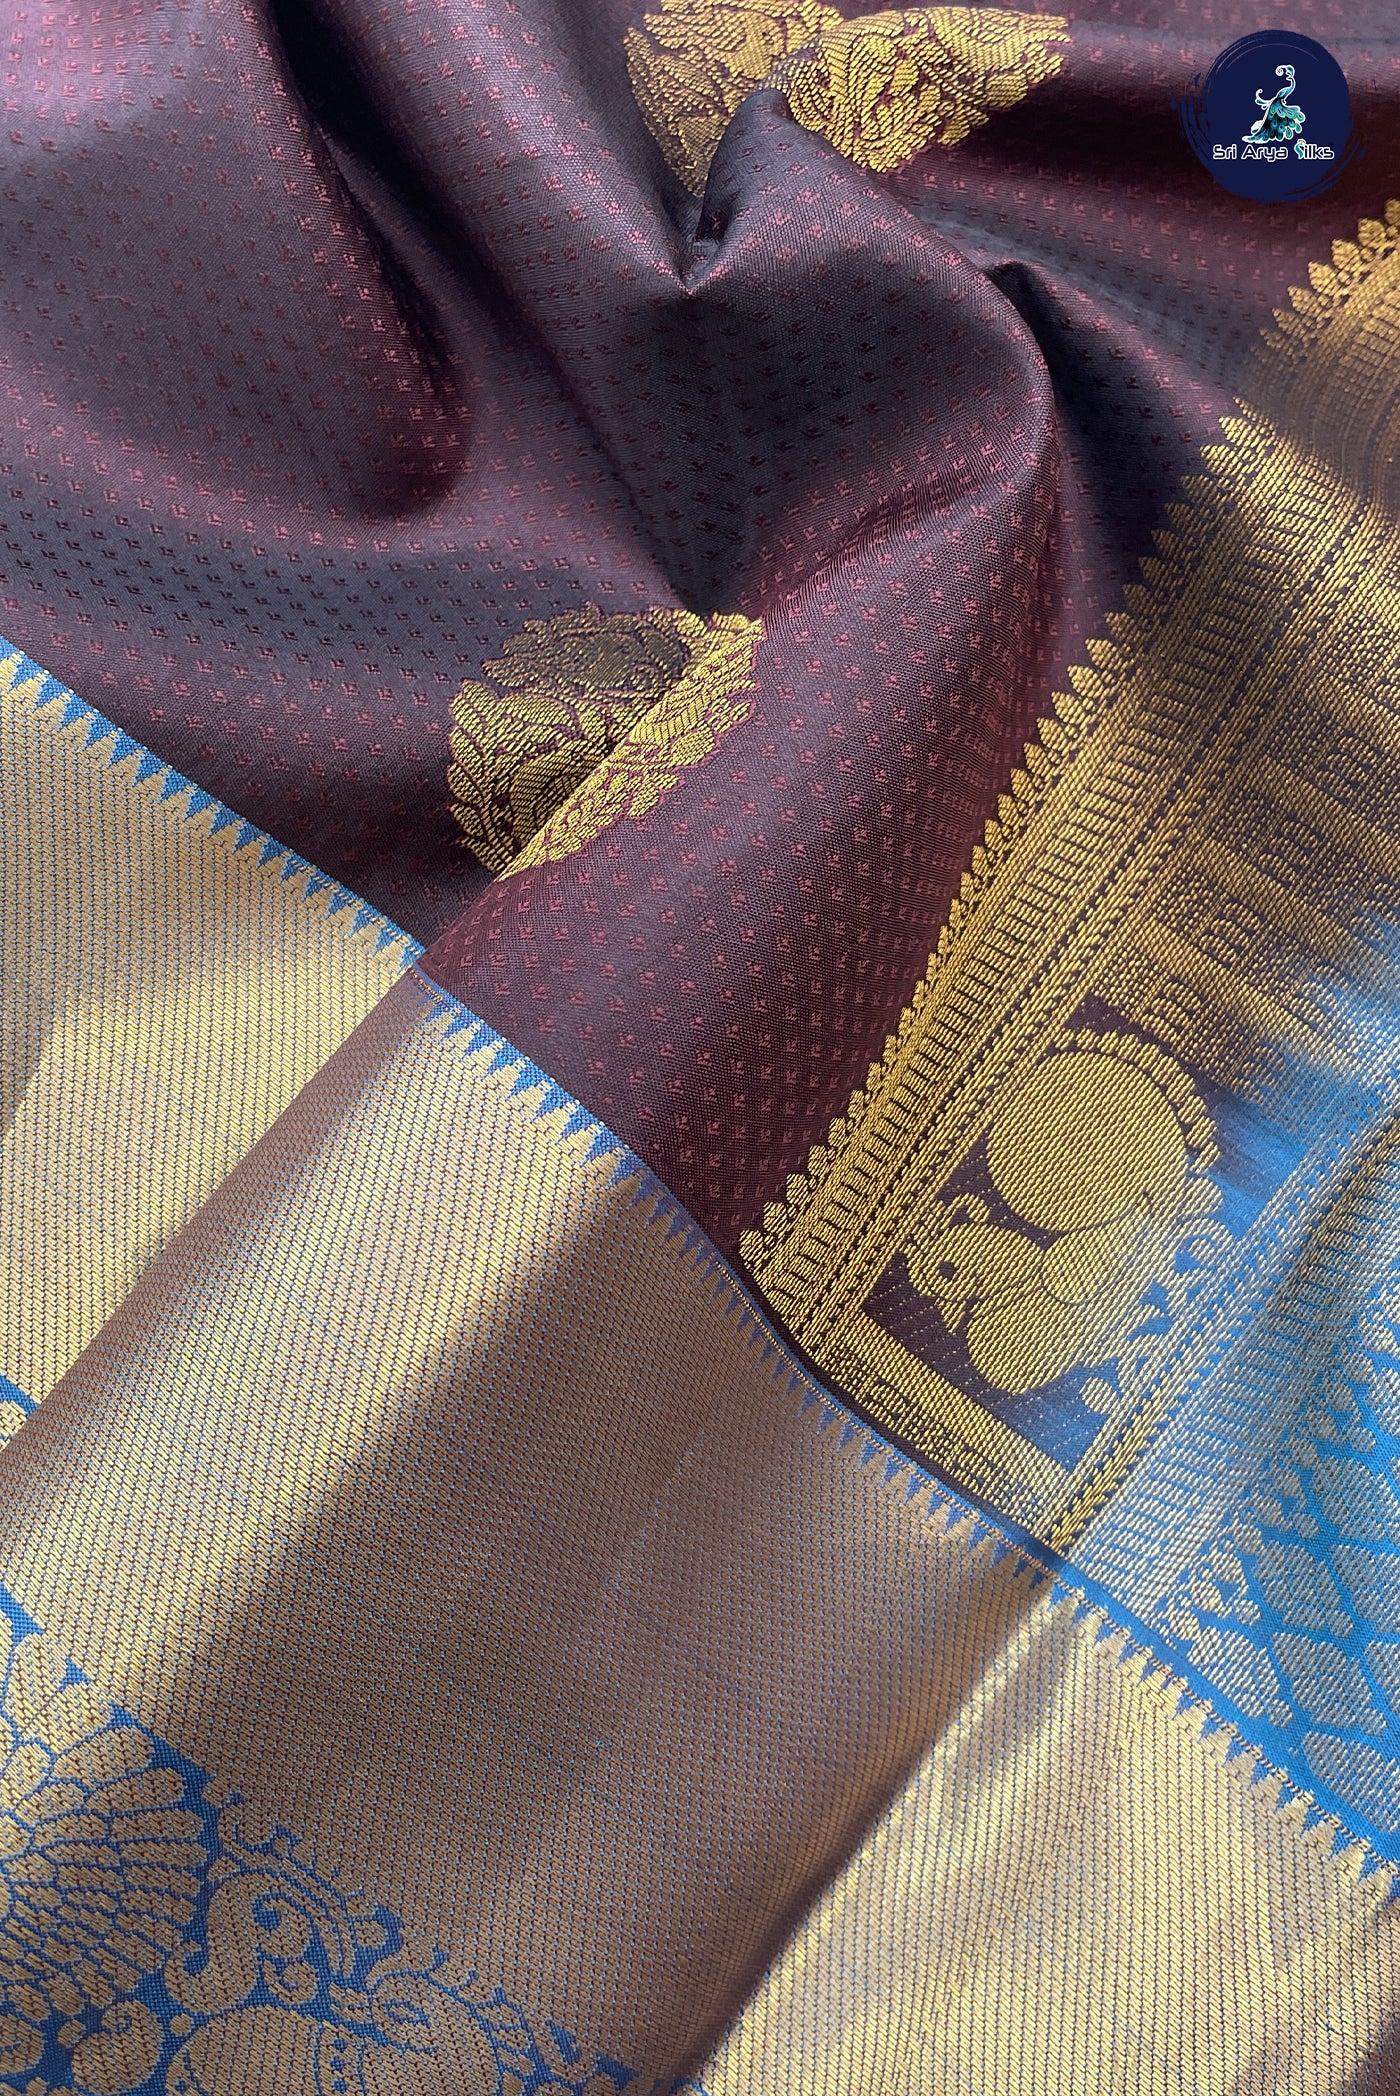 Coffee Brown Embosed Saree With Copper Sulphate Blue Blouse & Buttas Pattern